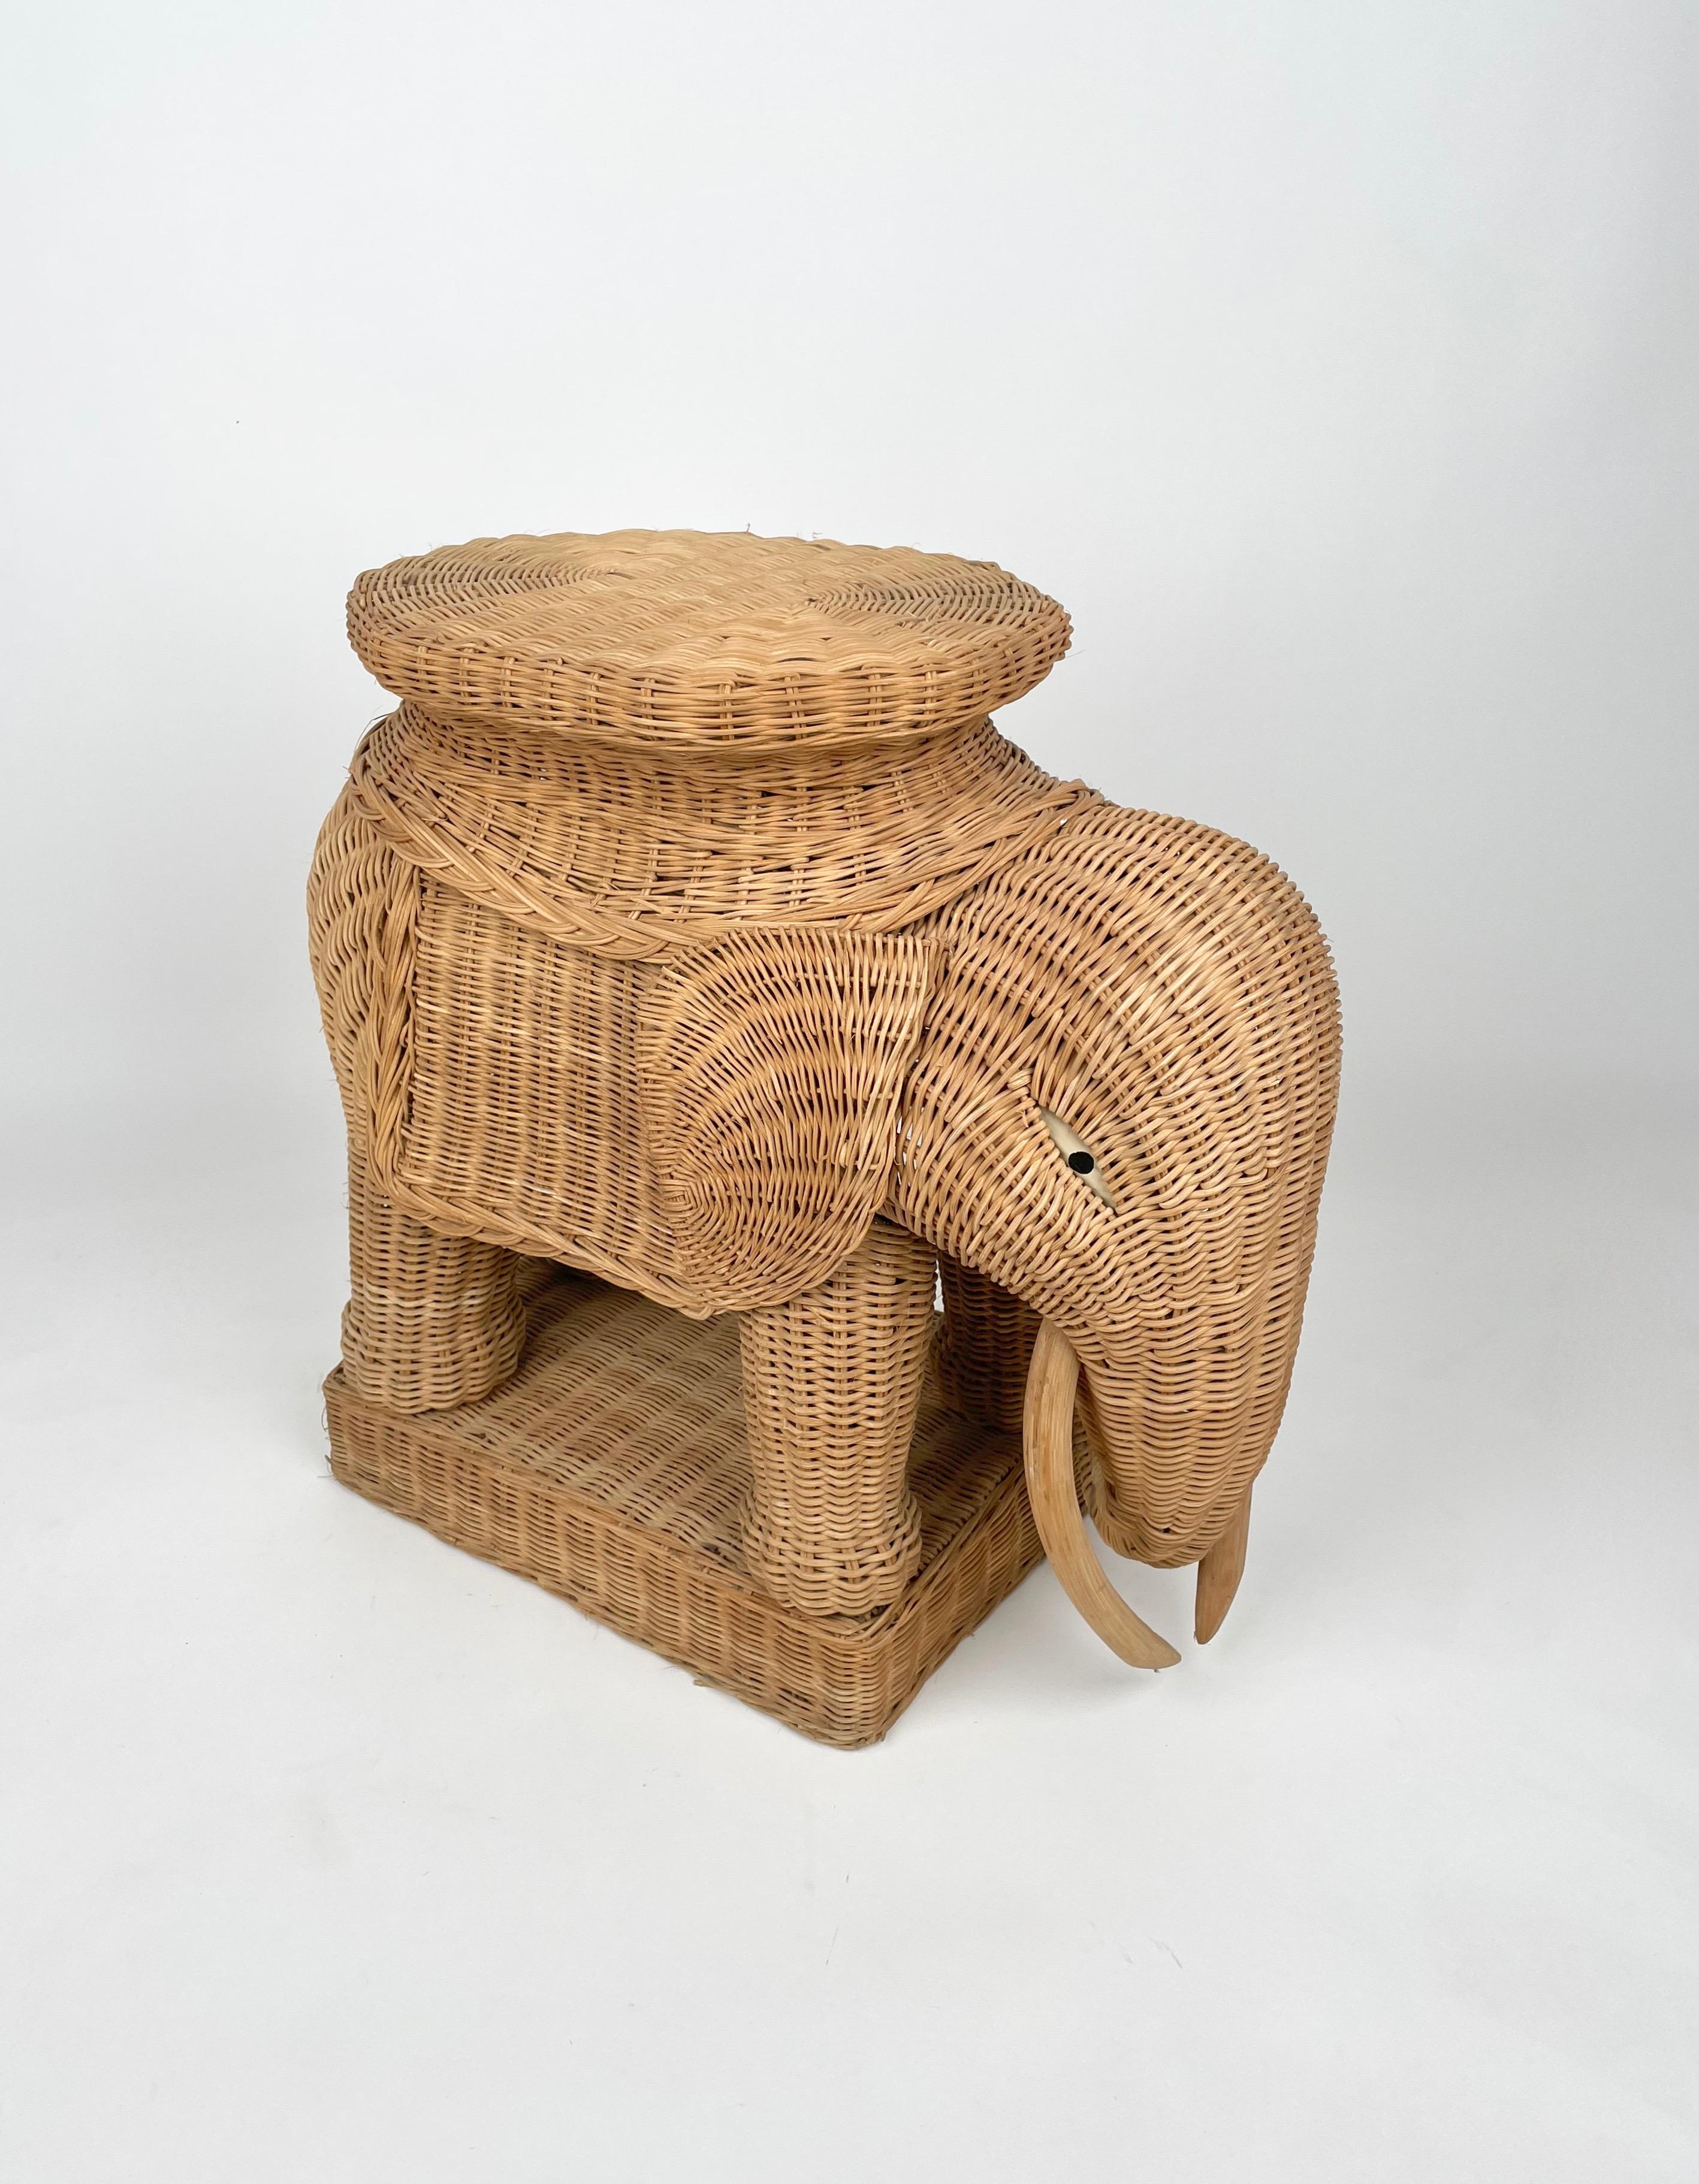 Elephant-shaped end coffee table in hand-braided rattan accented with wood tusks.

Made in France, 1960s.